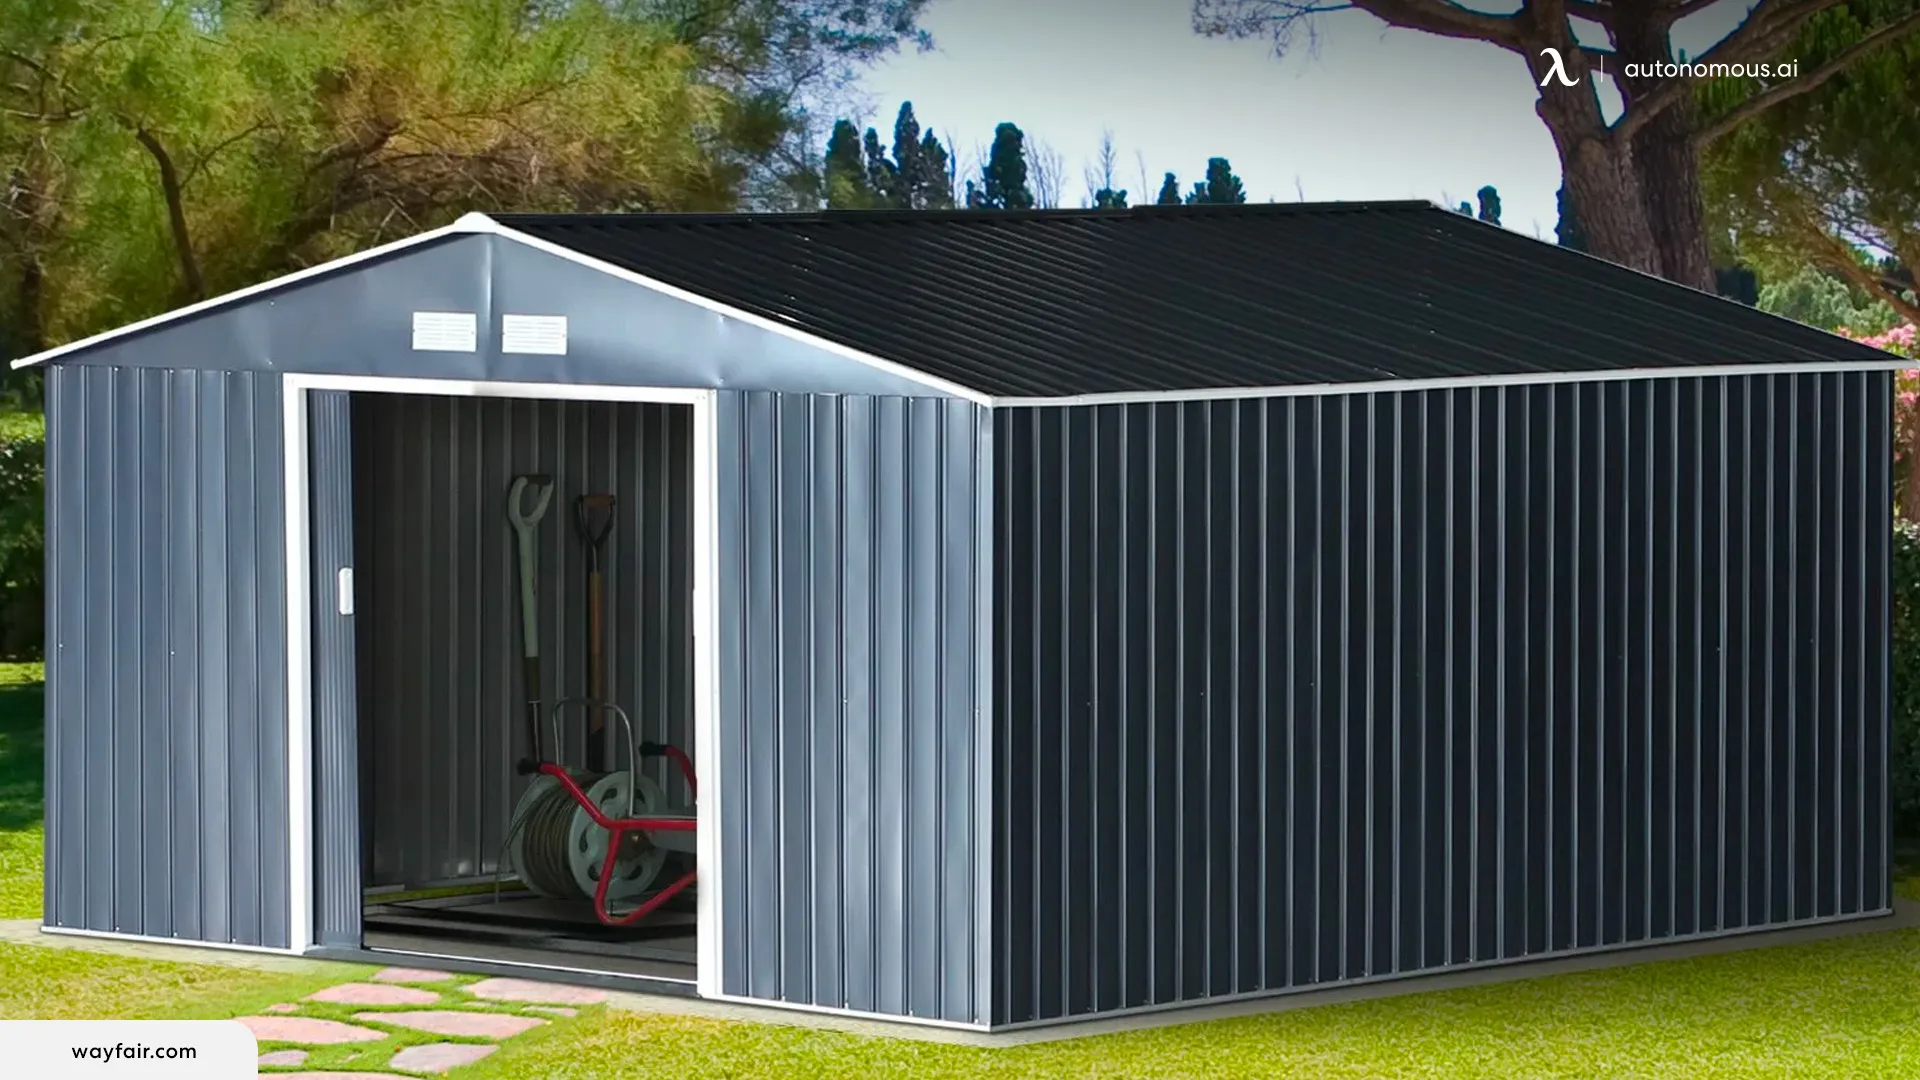 How to Keep a Metal Shed Cool? Tips and Tricks!